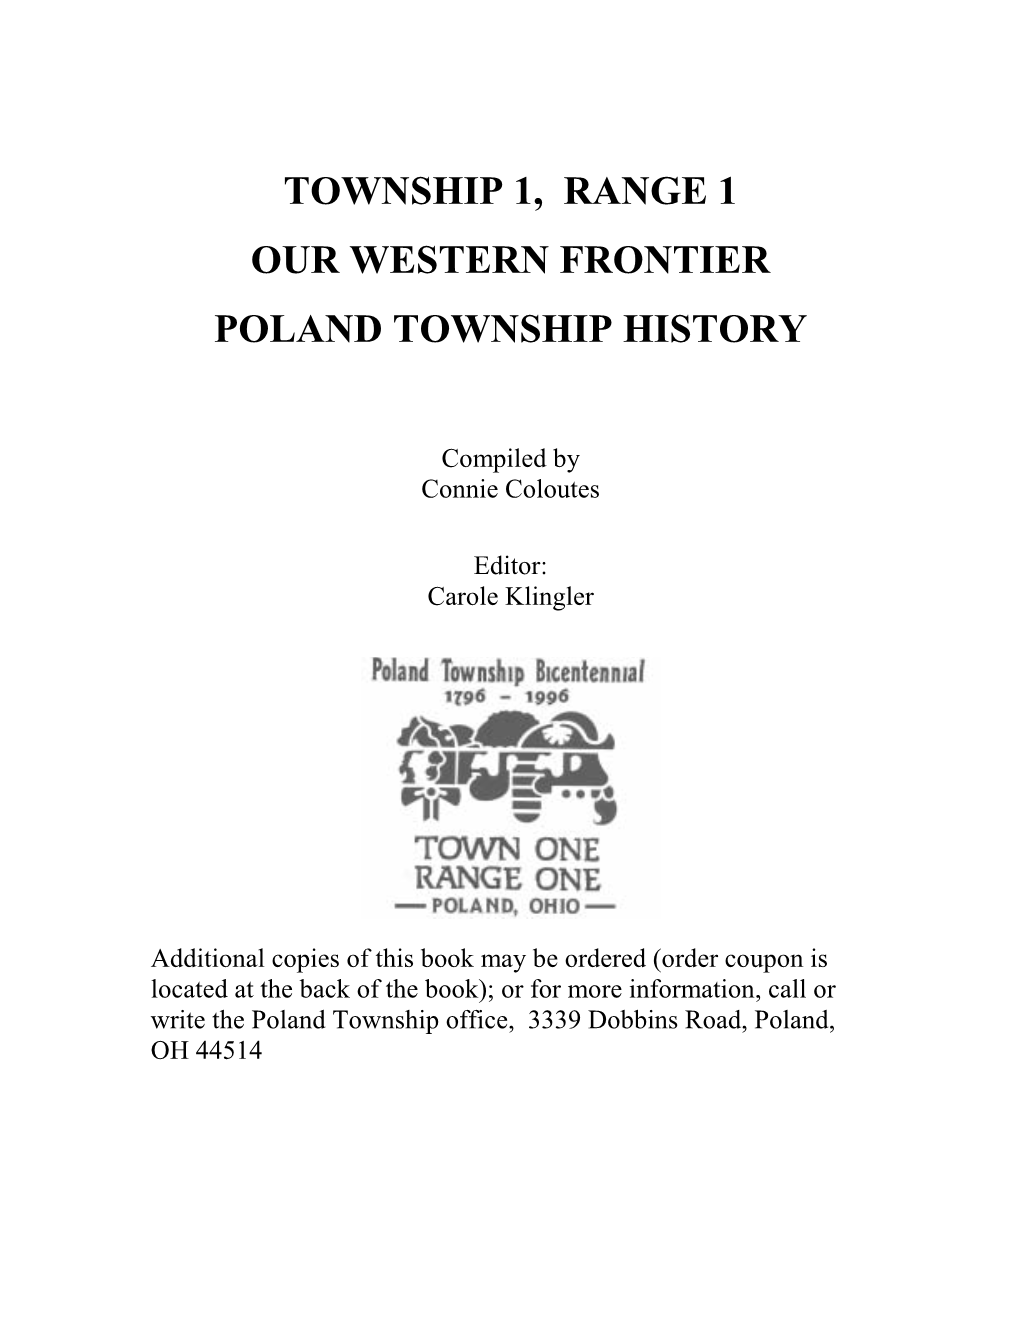 Introduction | Our Western Frontier | Poland Historical Society